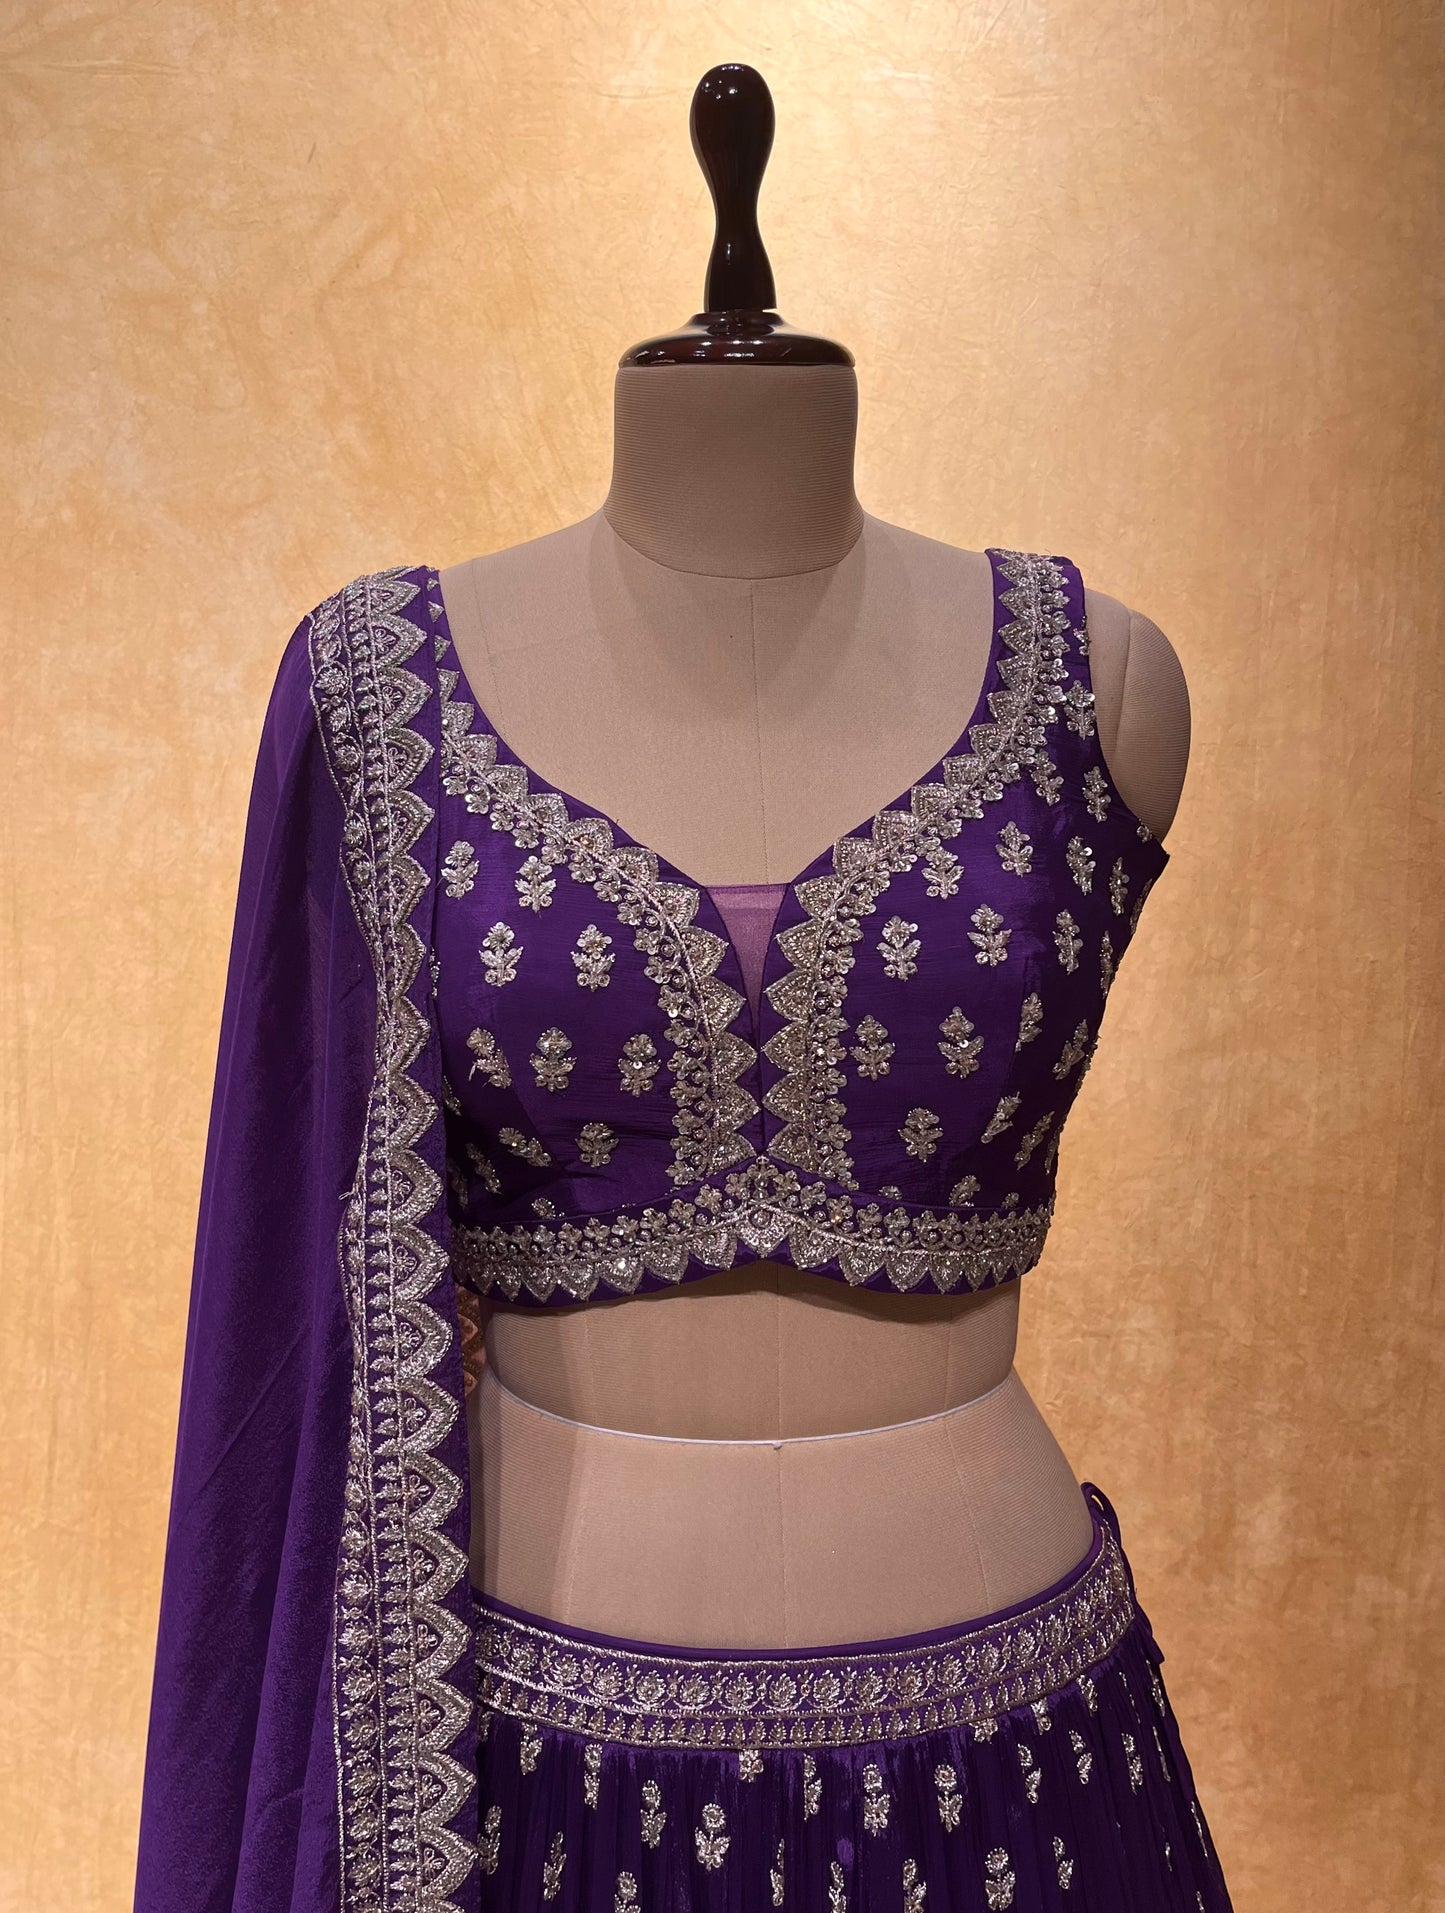 PURPLE COLOUR CHINON LEHENGA WITH CROP TOP BLOUSE EMBELLISHED WITH CUTDANA, SEQUINS & ZARI WORK